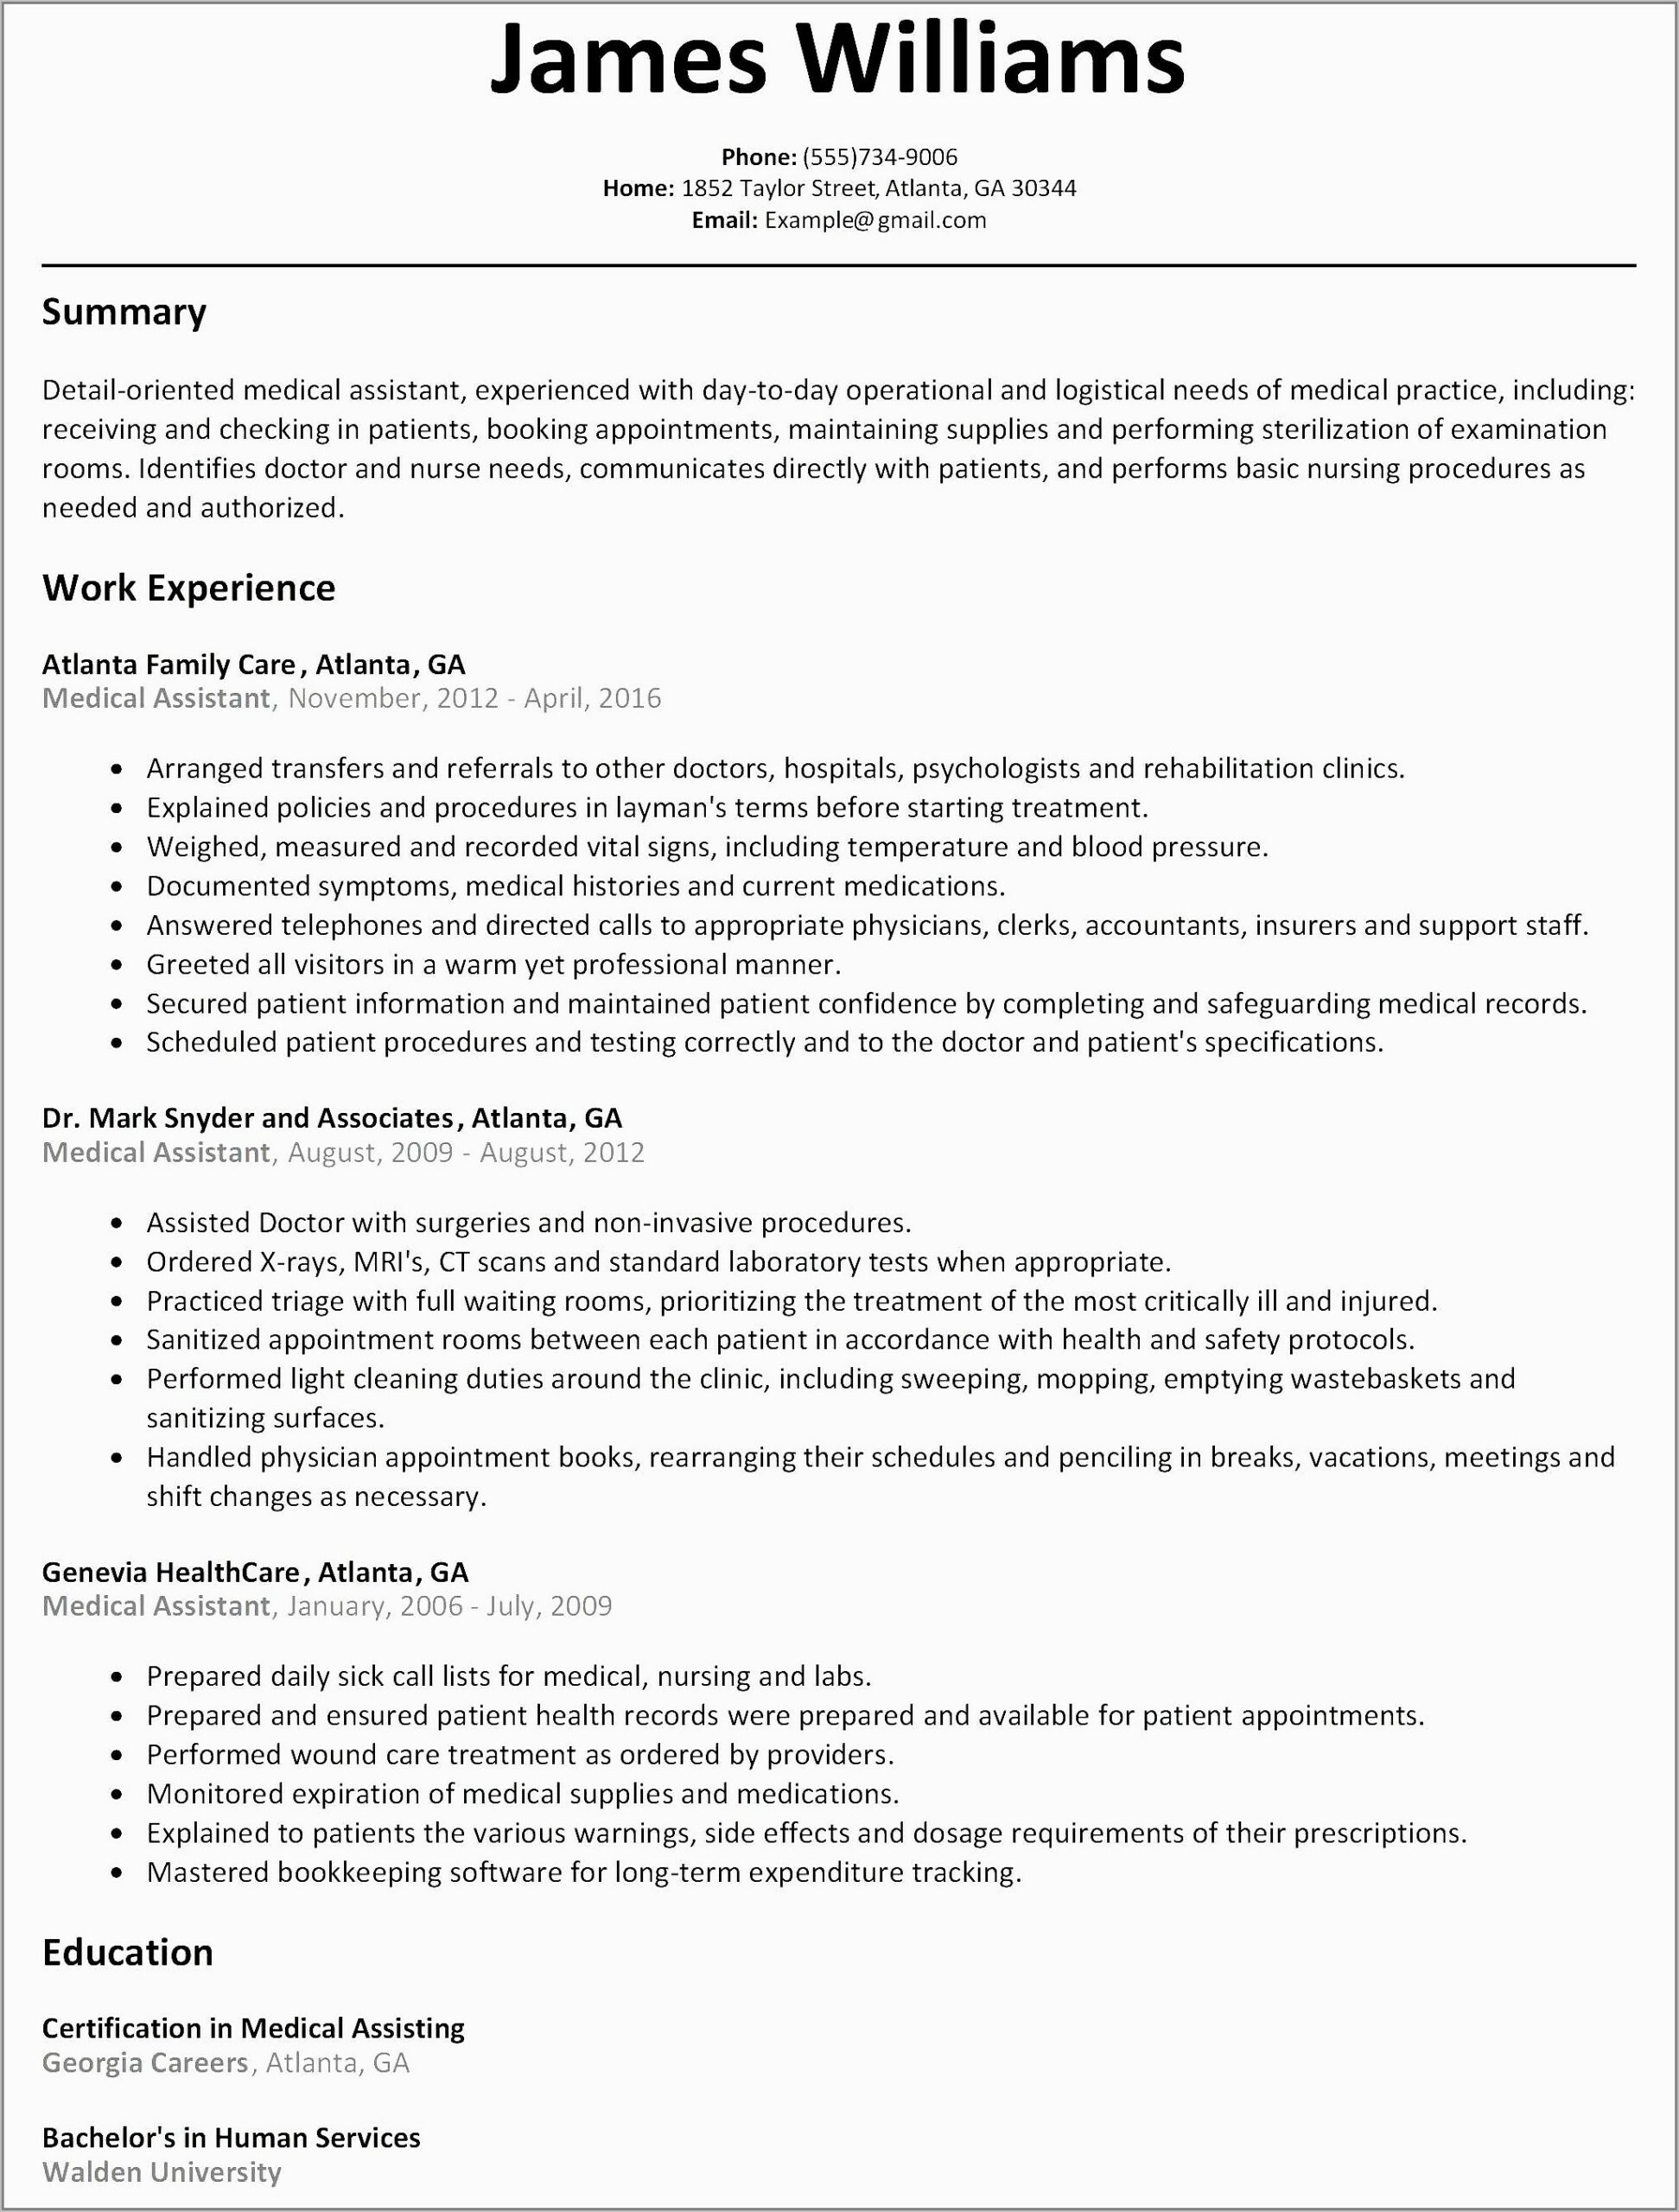 Examples Of Professional Resumes